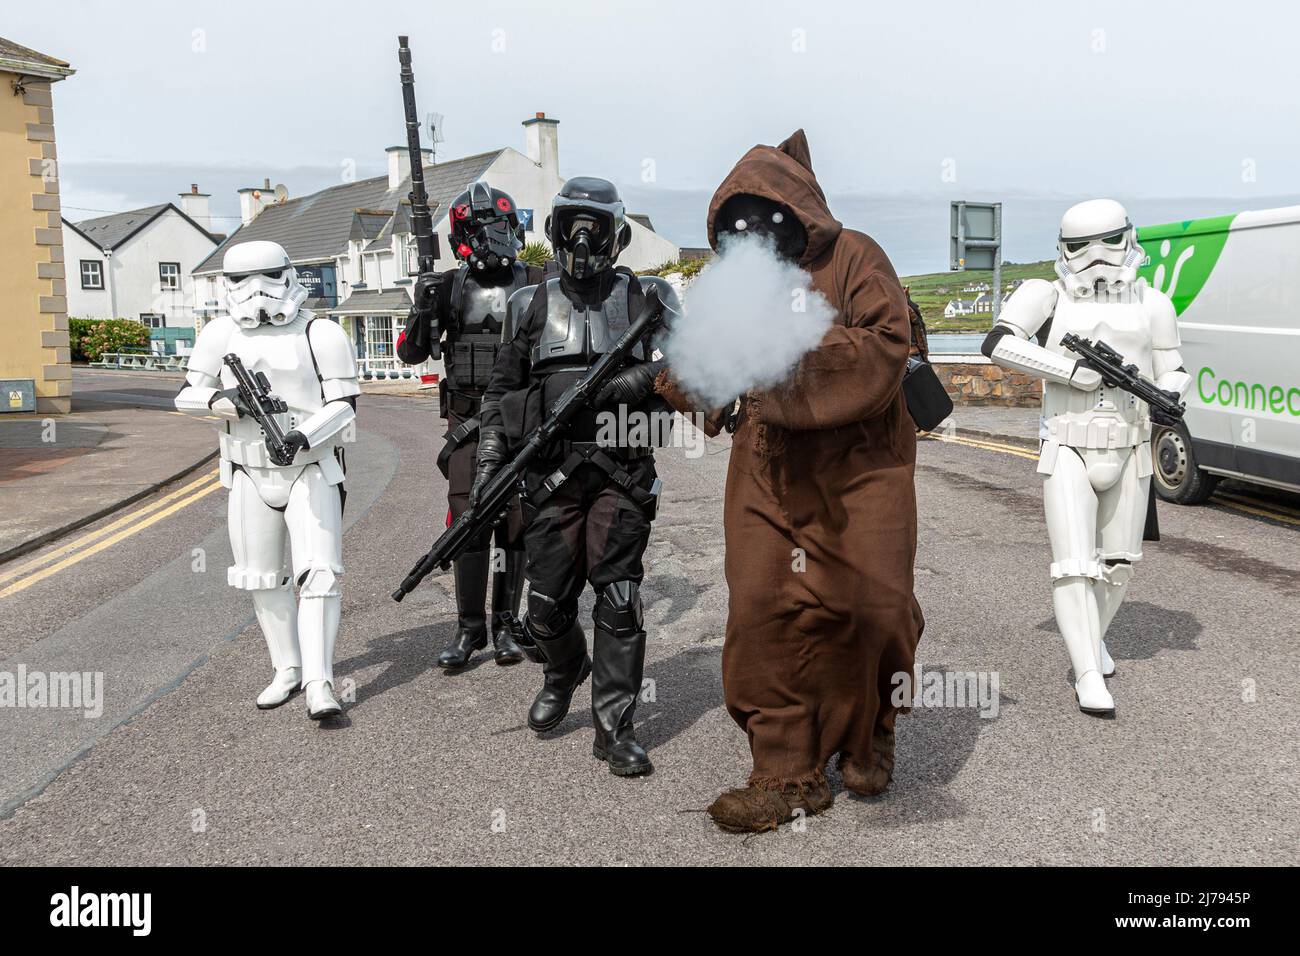 Star wars characters at May the 4th Festival in Portmagee, County Kerry Ireland Stock Photo